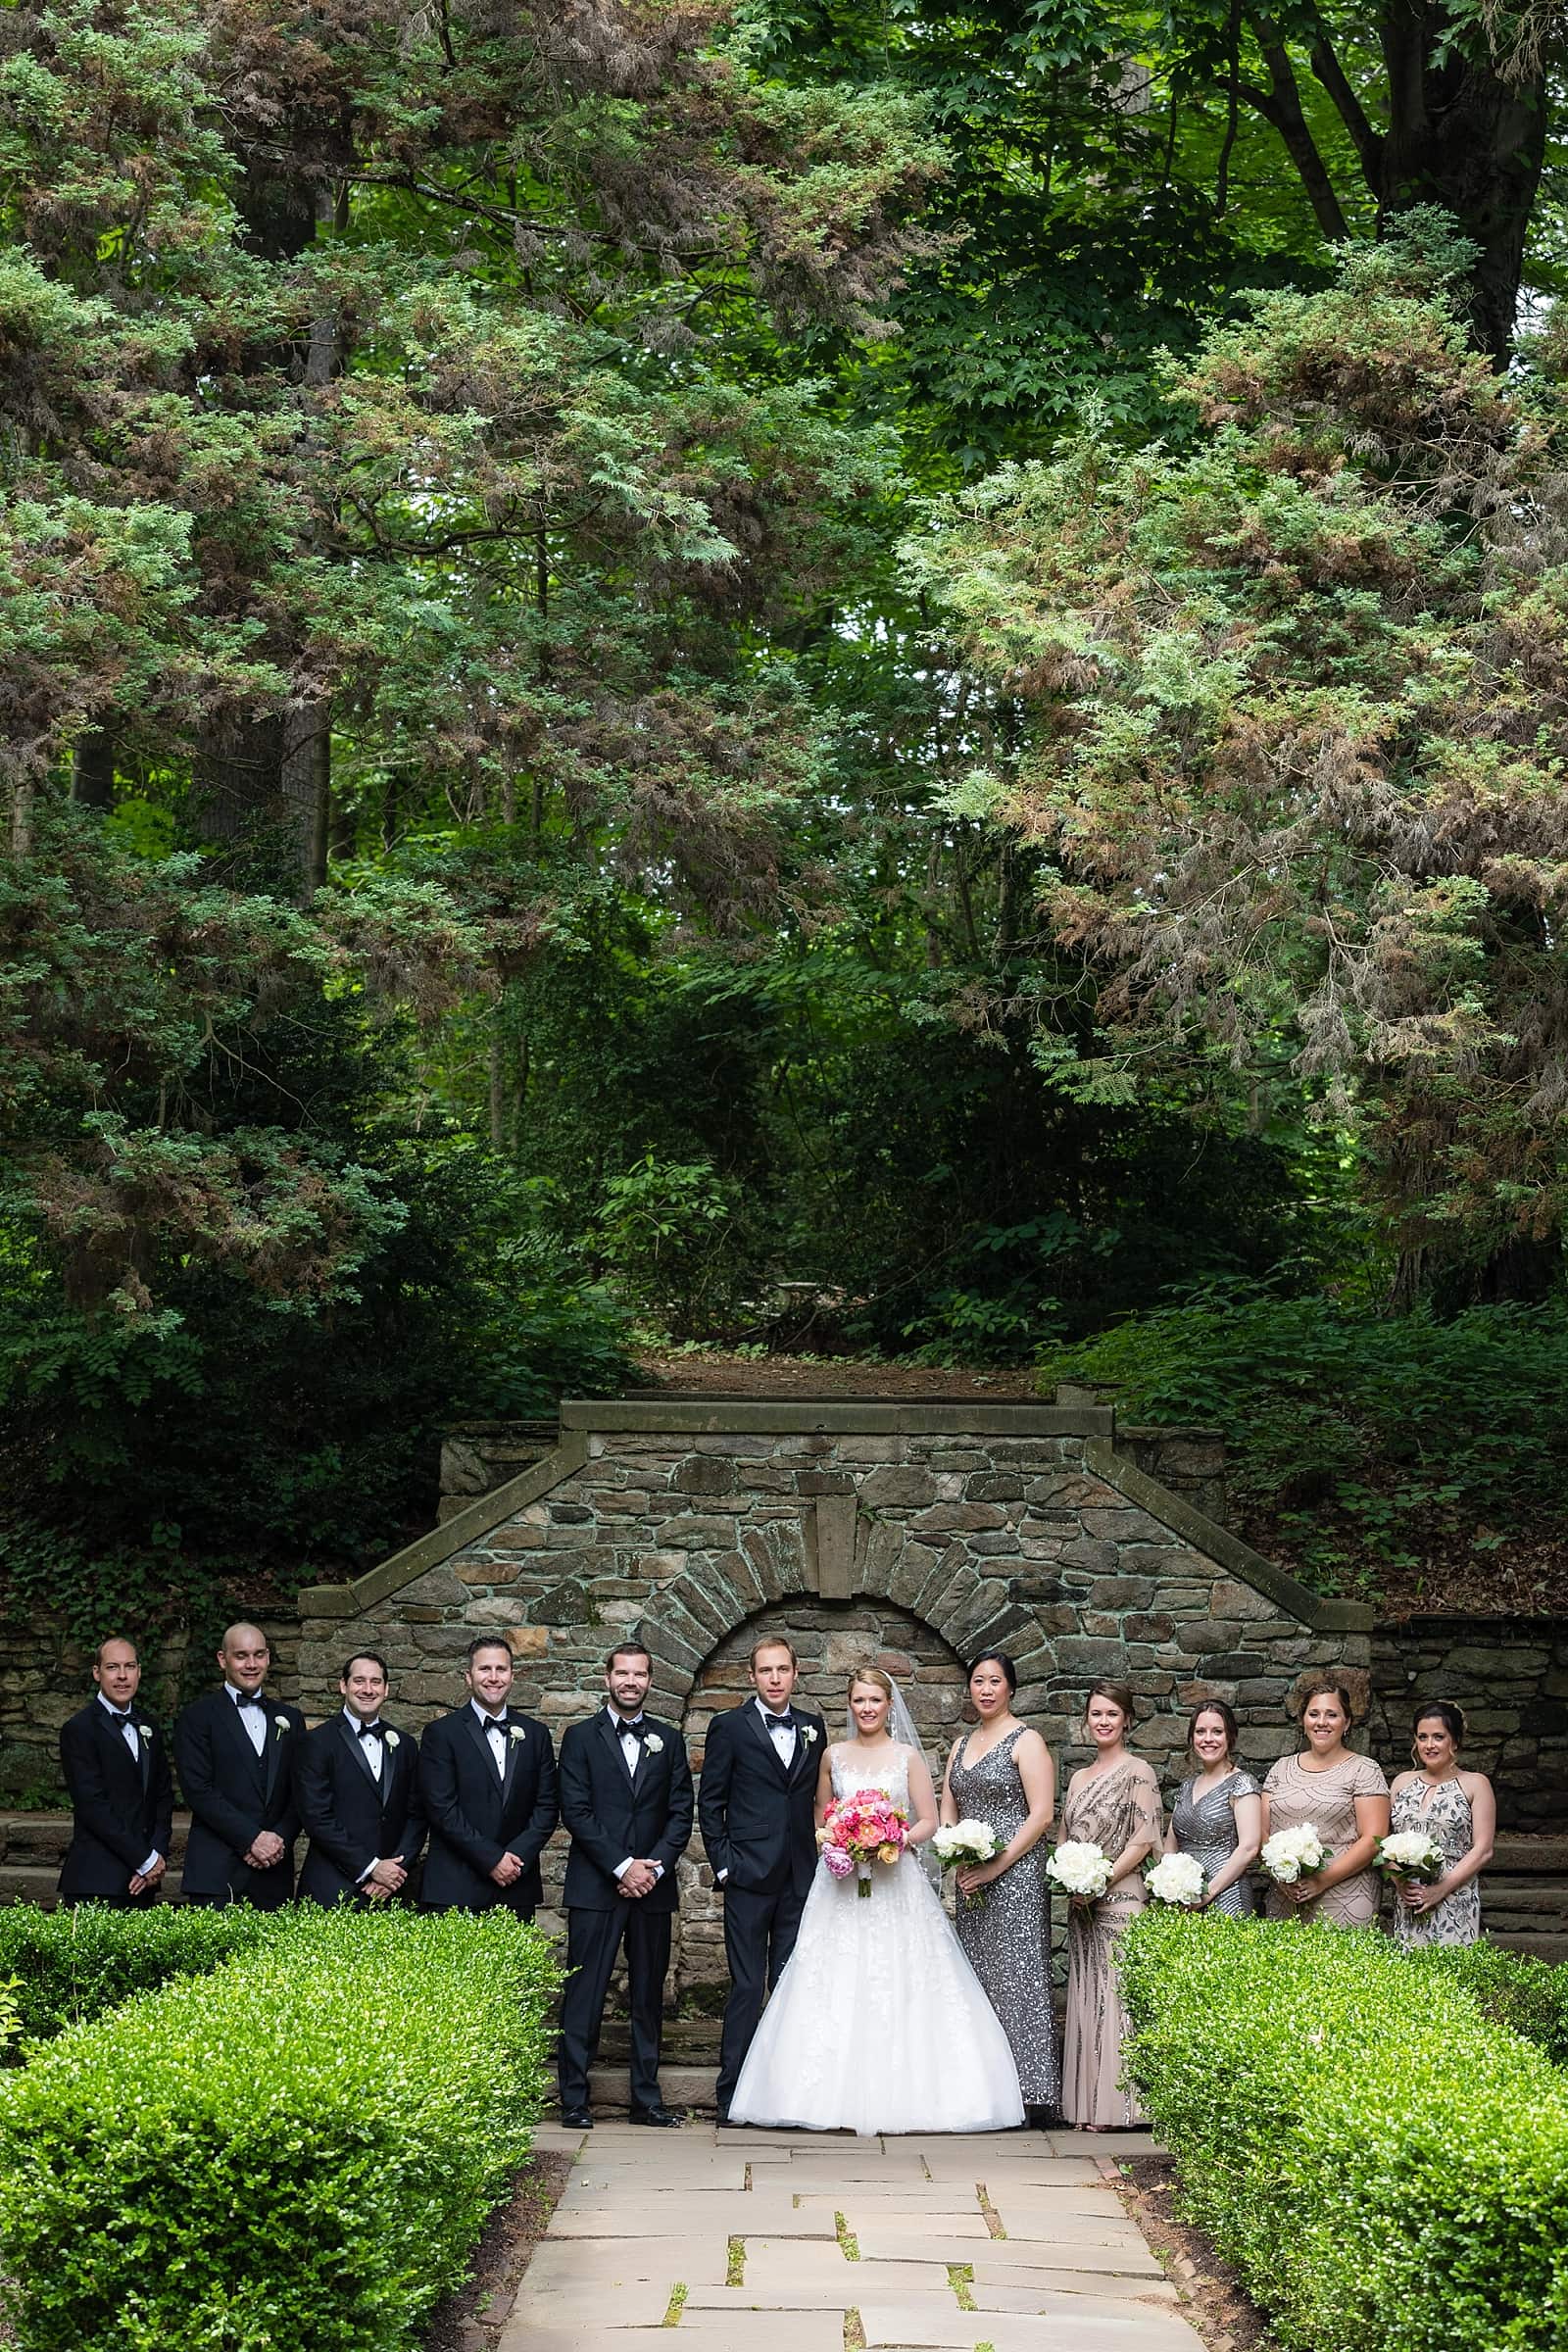 Bridal party, bridesmaids, groomsmen, parque at ridley creek state park,